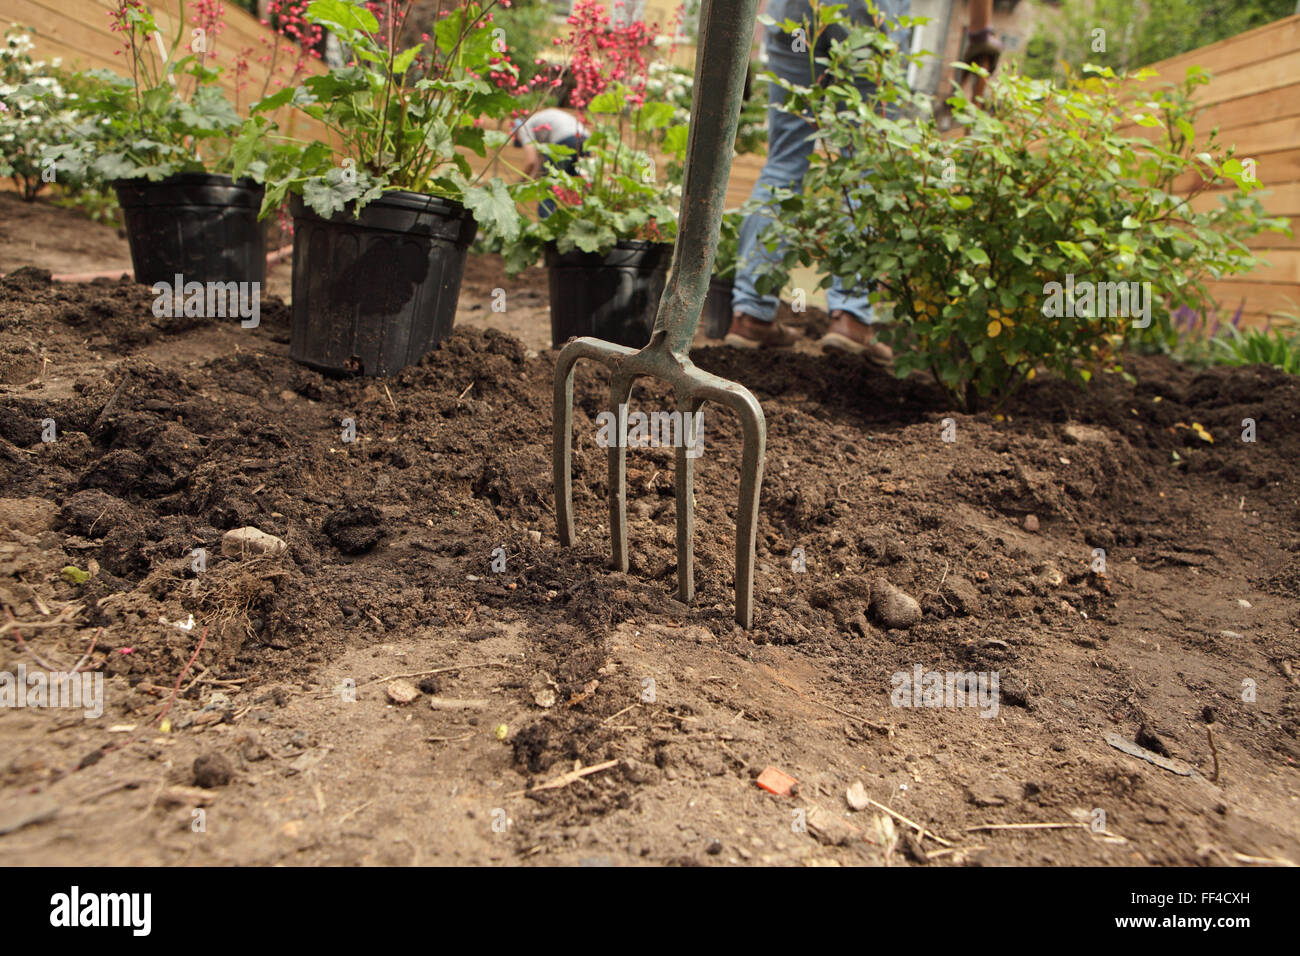 Garden plants in pots with a fork embedded in soil ready for a landscaping job in the garden of a newly renovated Brooklyn townhouse Stock Photo